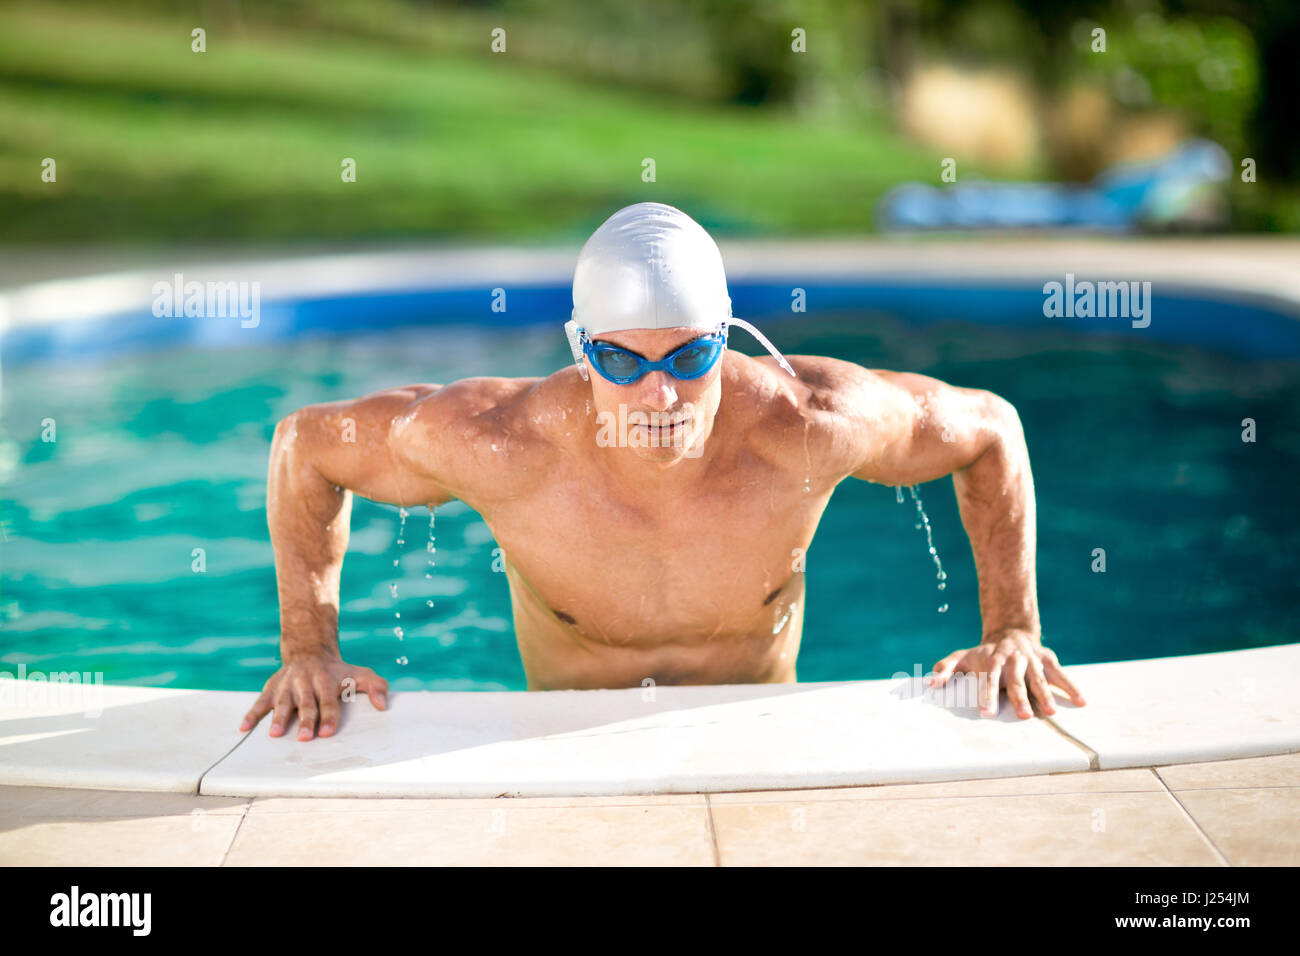 Handsome swimmer with cap and goggles in swimming pool Stock Photo